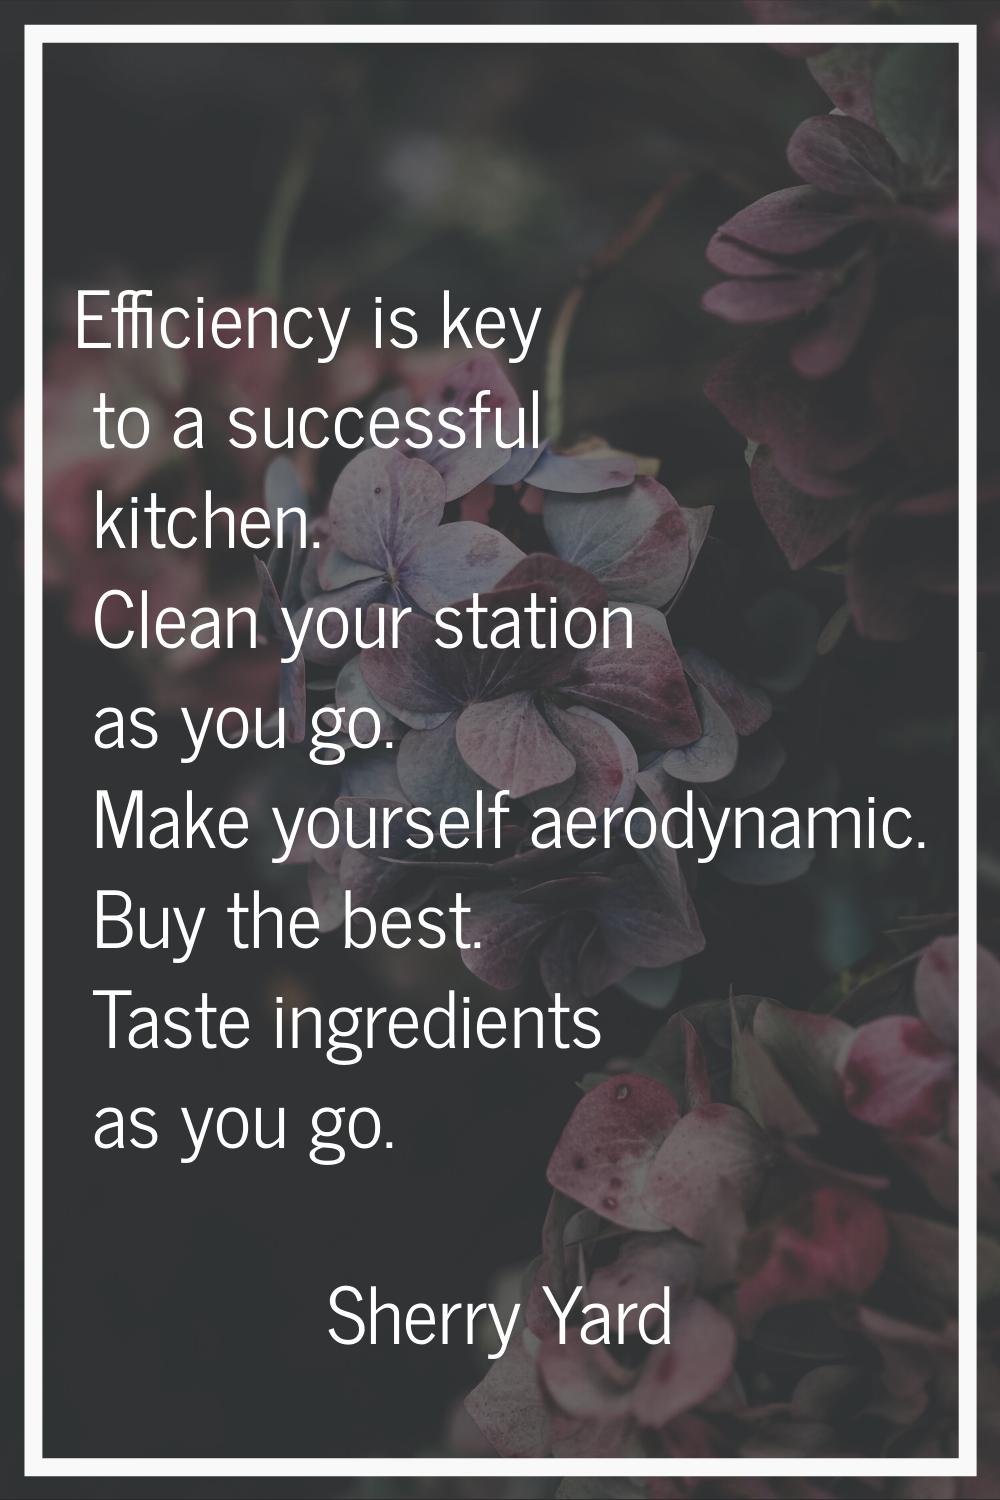 Efficiency is key to a successful kitchen. Clean your station as you go. Make yourself aerodynamic.